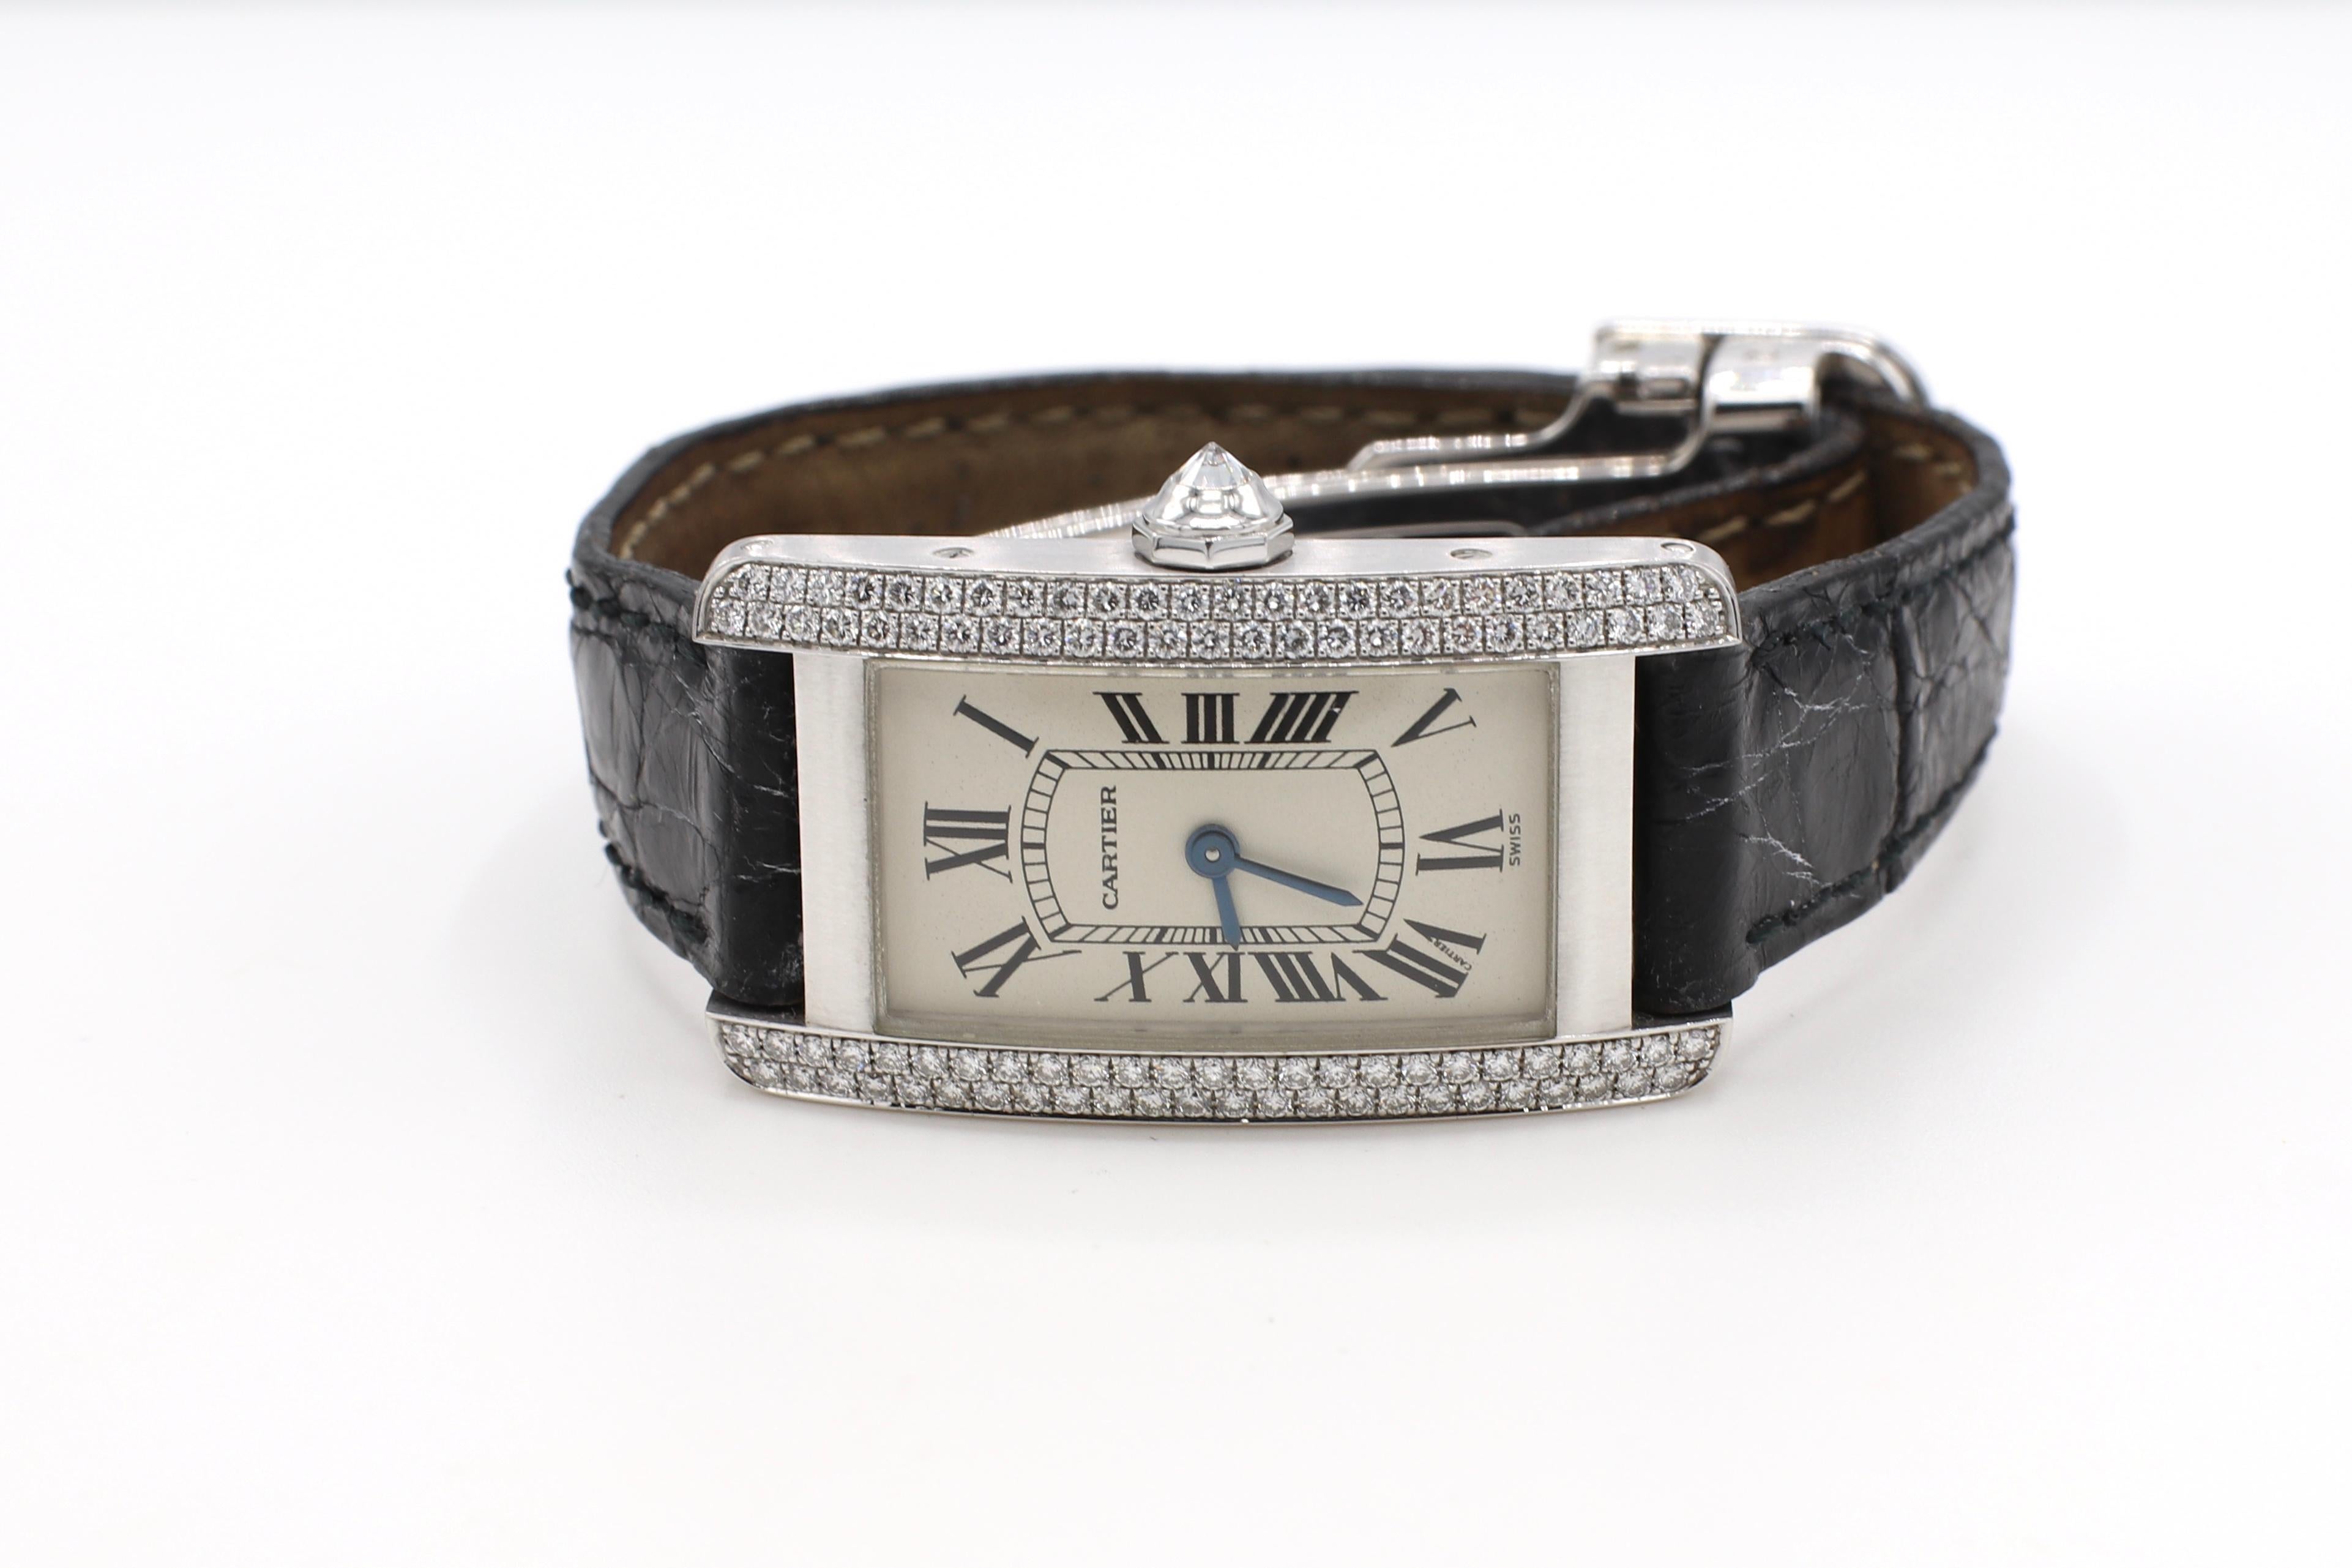 Cartier Tank Americaine 1713 18K White Gold Diamond Leather Strap Watch 

Reference: 1713
Metal: 18k white gold
Crystal: Sapphire
Movement: Quartz
Strap: Black leather strap, signs of wear, please note pictures for condition 
Clasp: Folding 
Dial: